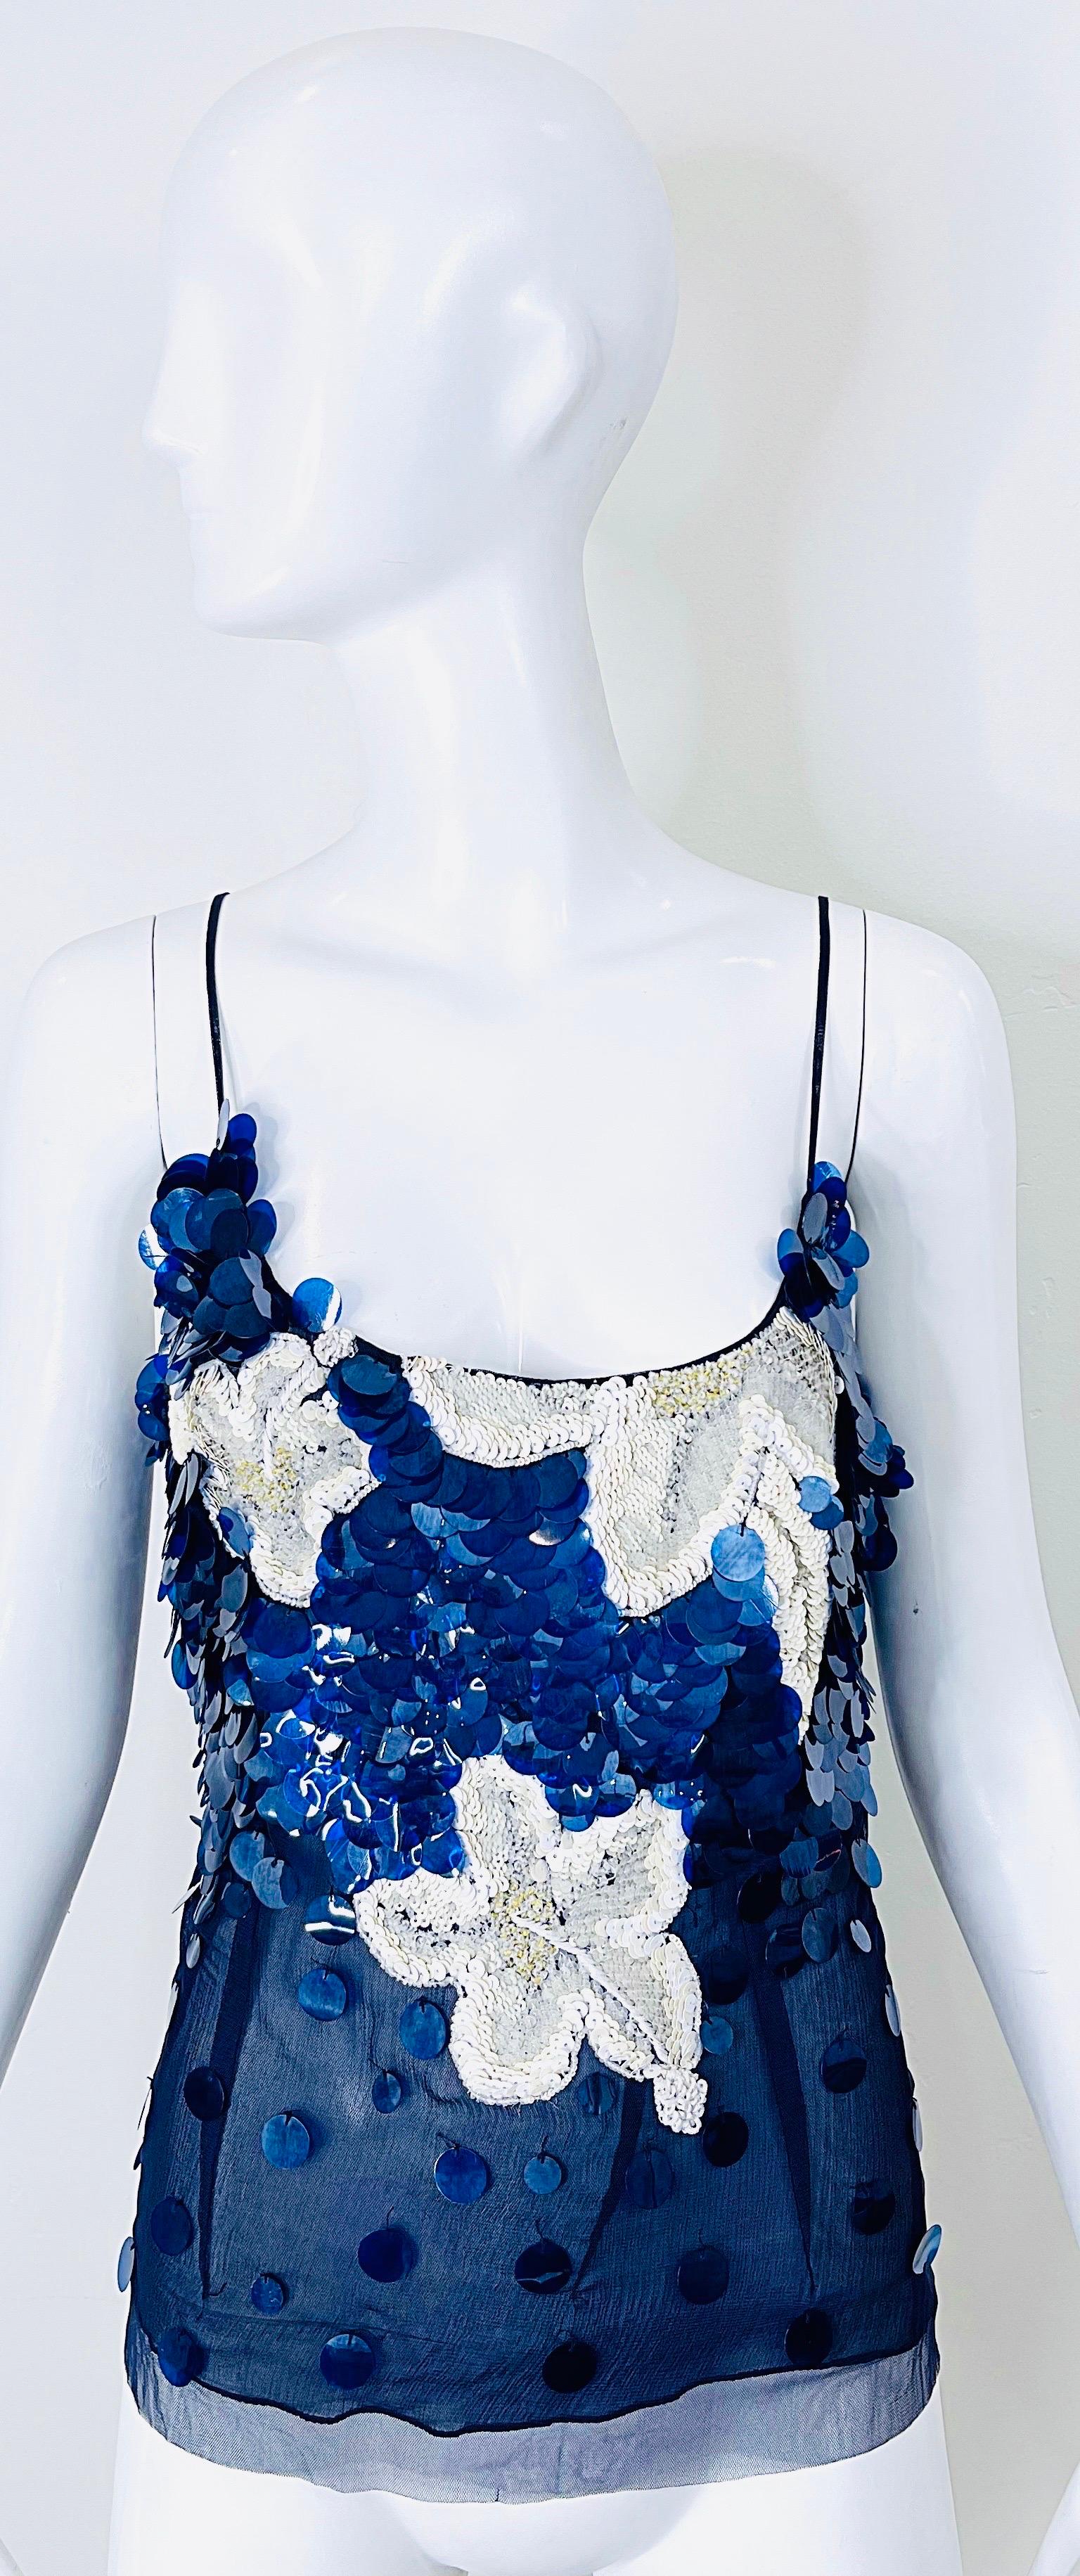 NWT Gianfranco Ferre Size 8 Navy Blue White Sequin Paillettes Silk Chiffon Top For Sale 10